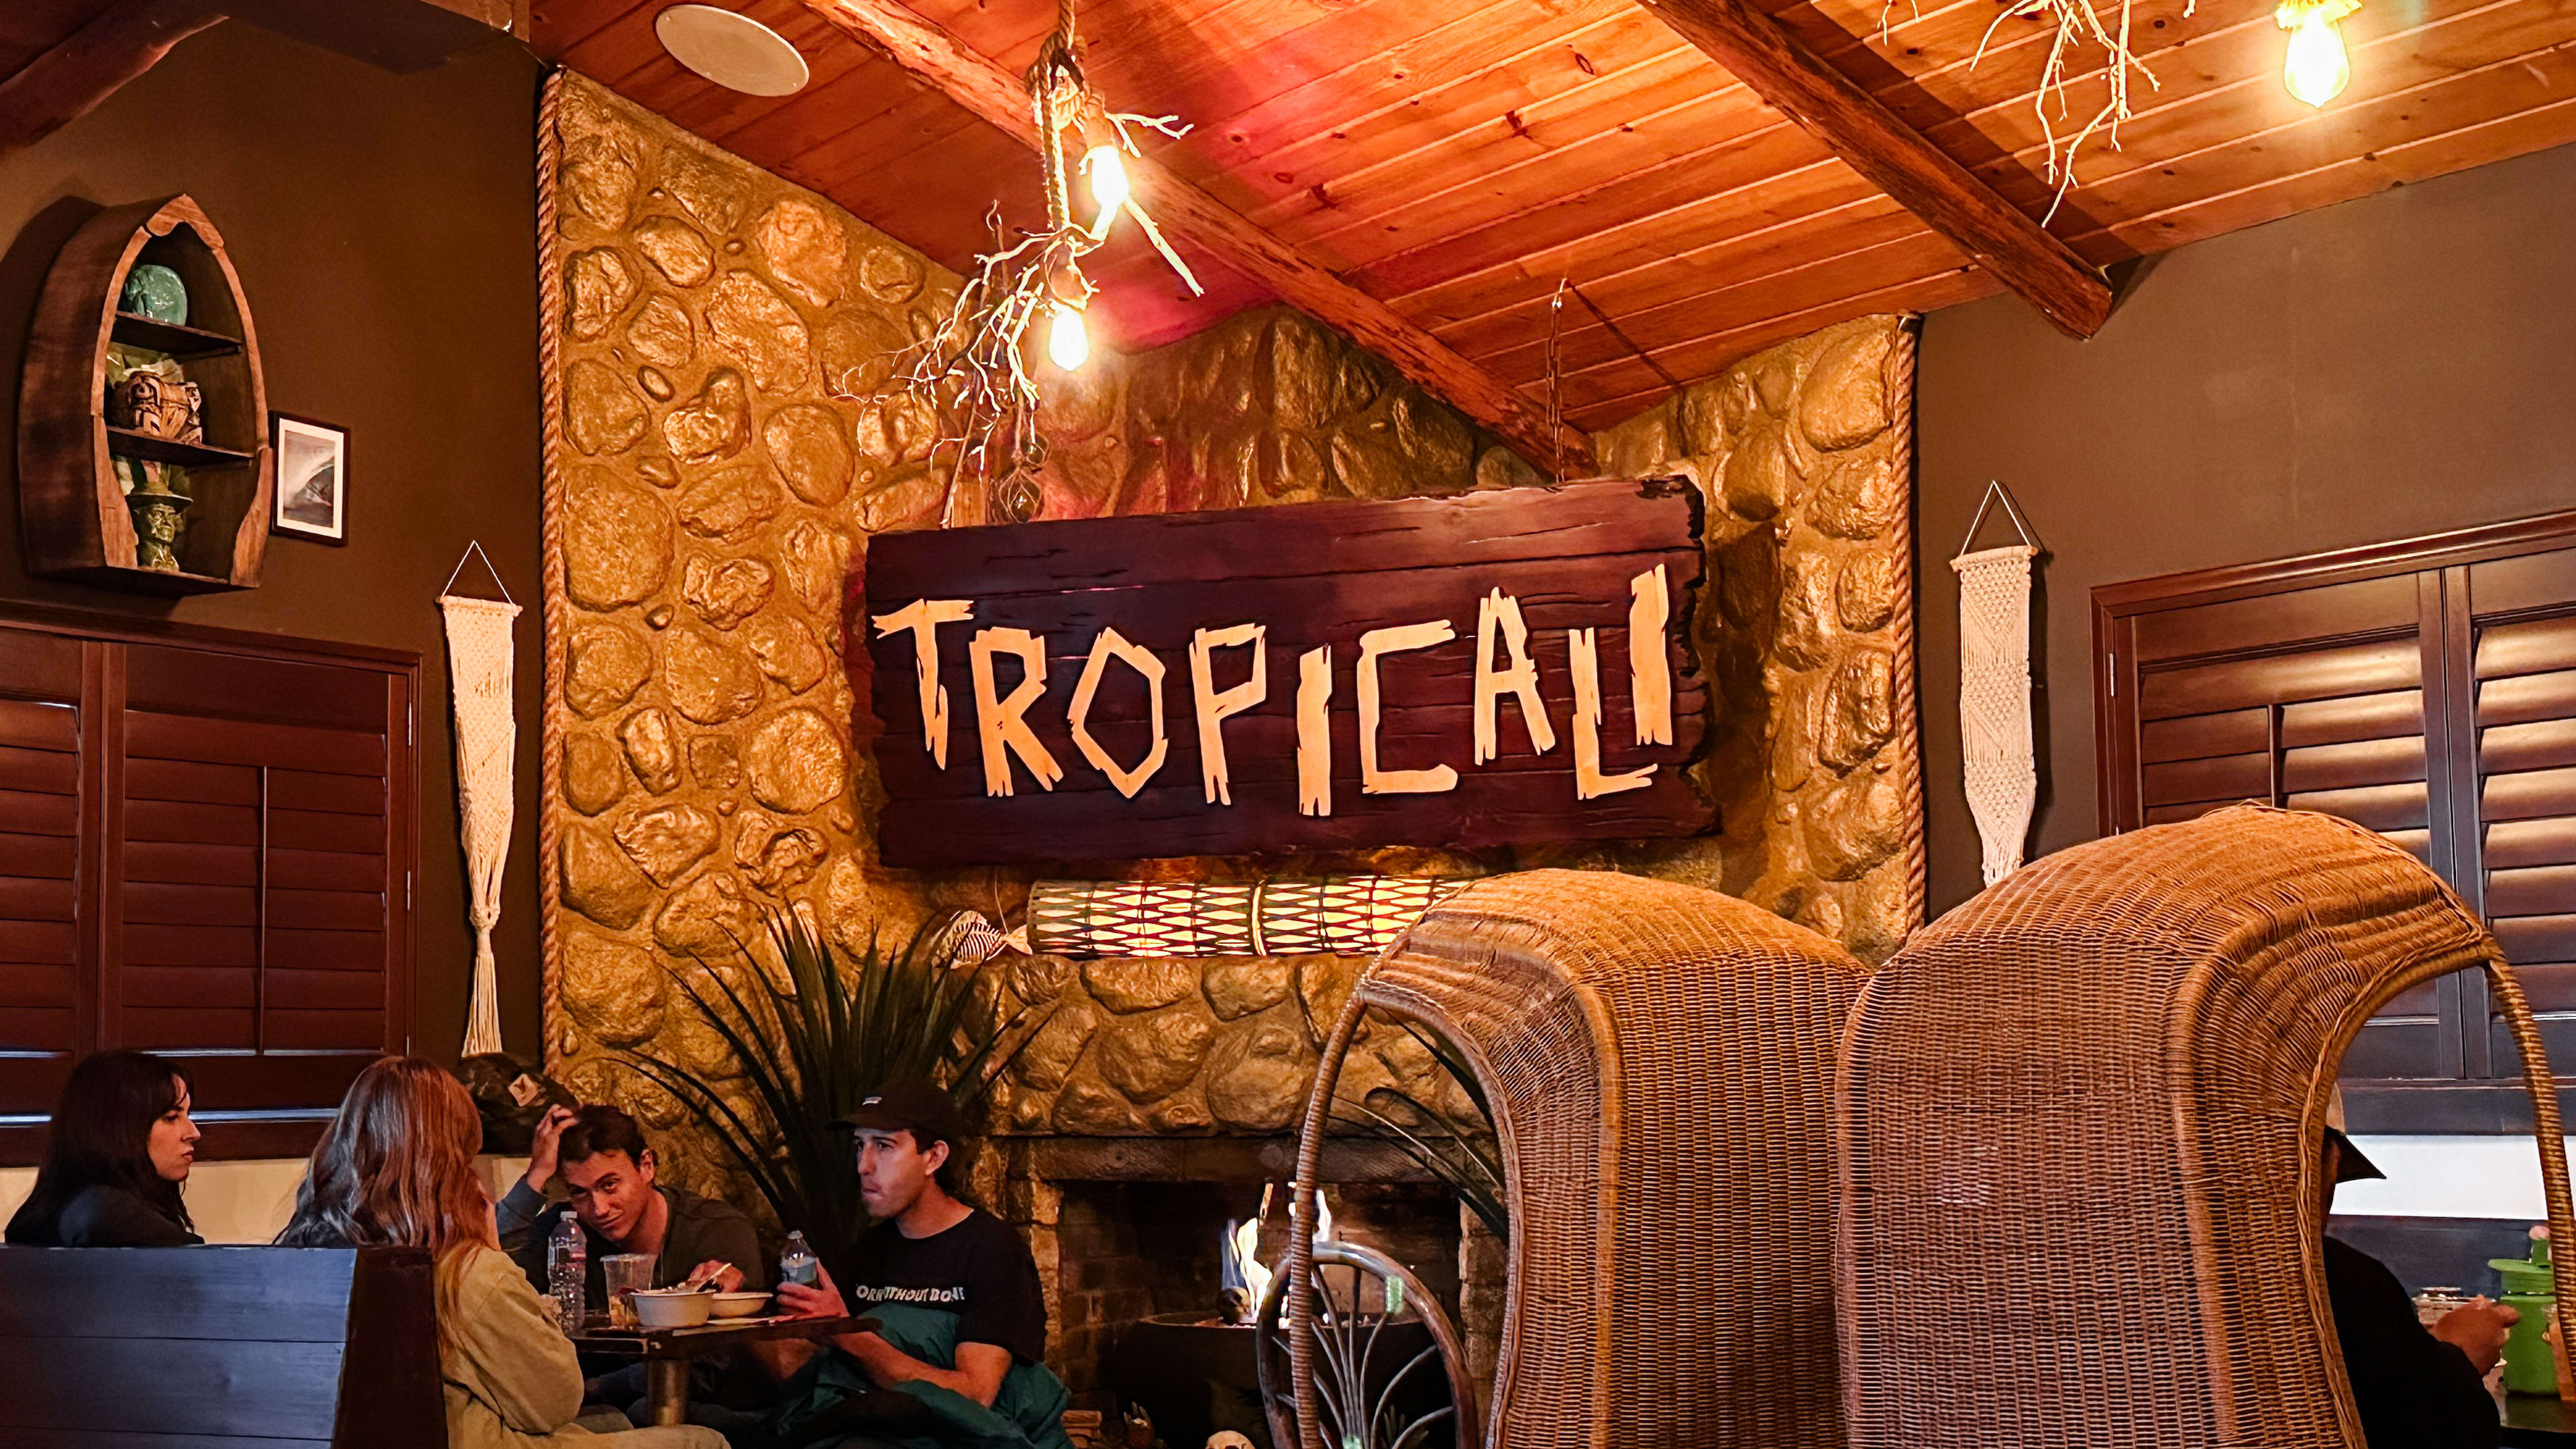 The wooden and stone interior of Tropicali. A large wooden sign, reading "Tropicali" hangs above a fireplace. There are large wicker egg chairs and wooden booths.